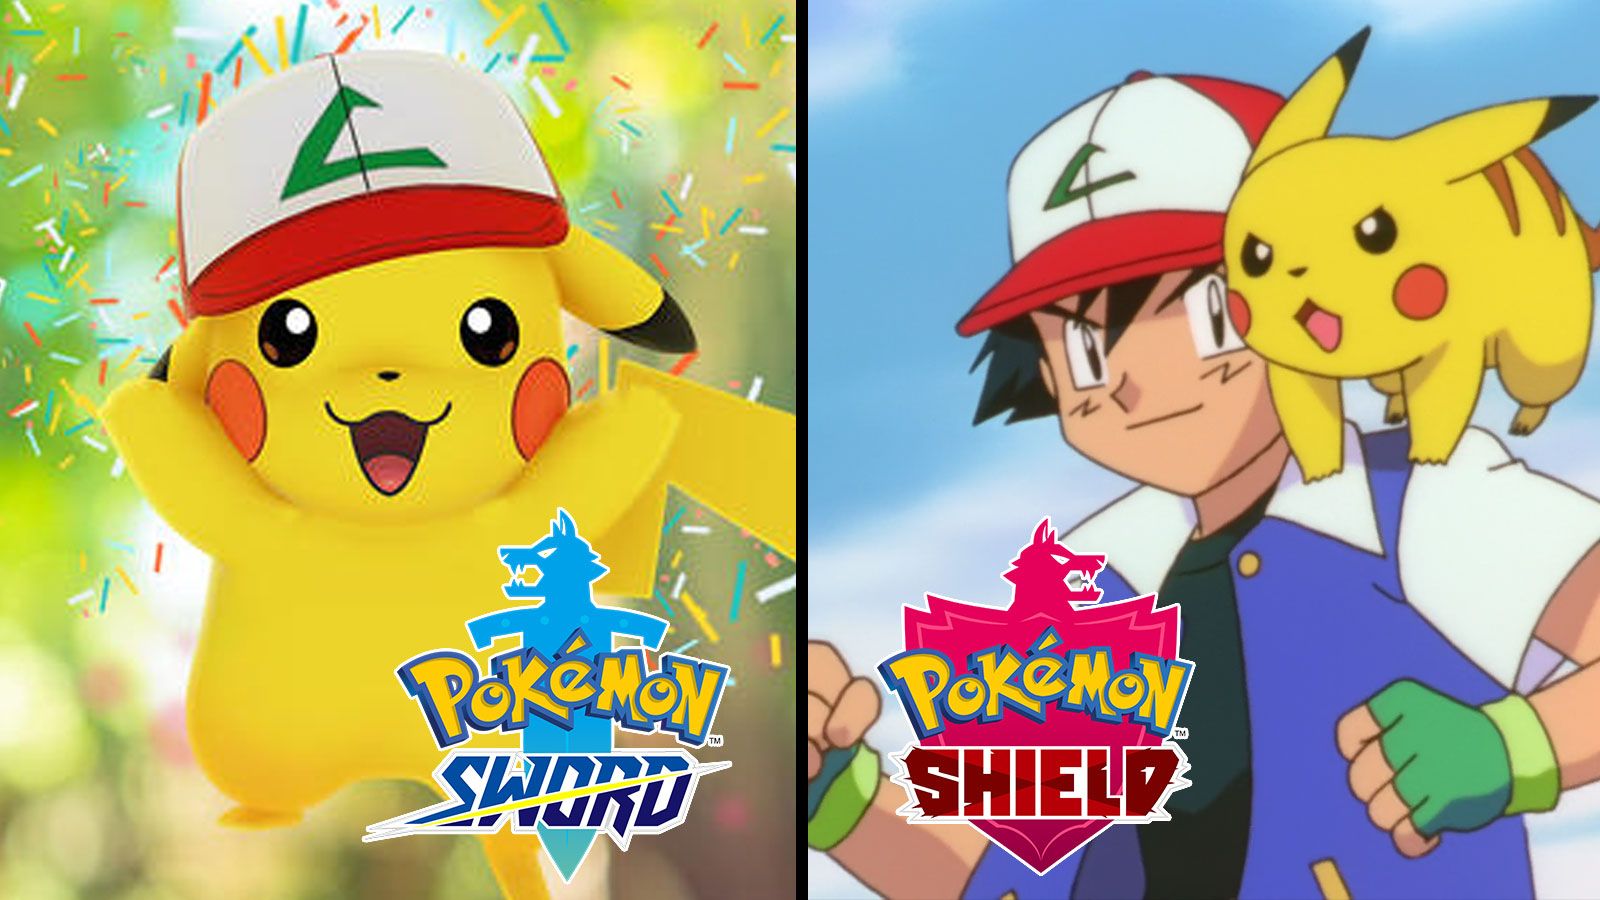 How to obtain special Ash hat Pikachu in Pokemon Sword & Shield